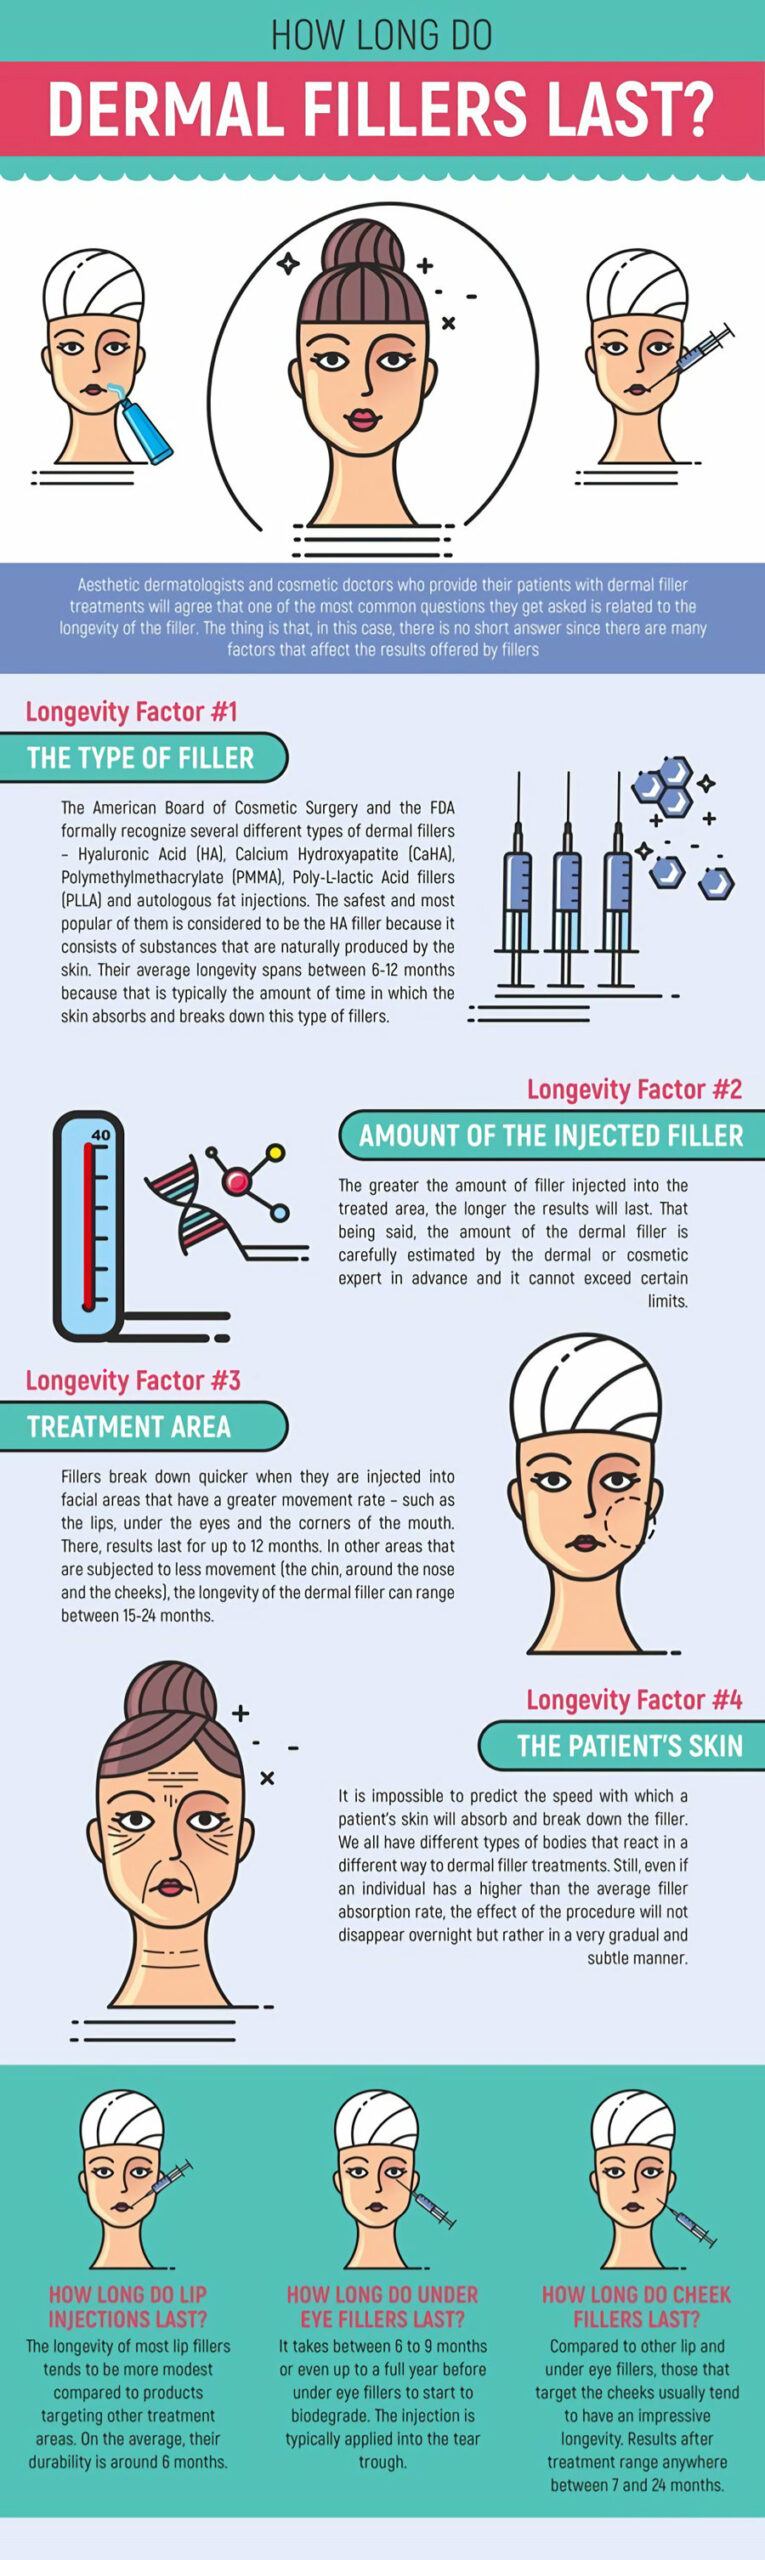 How long do dermal fillers last infographic